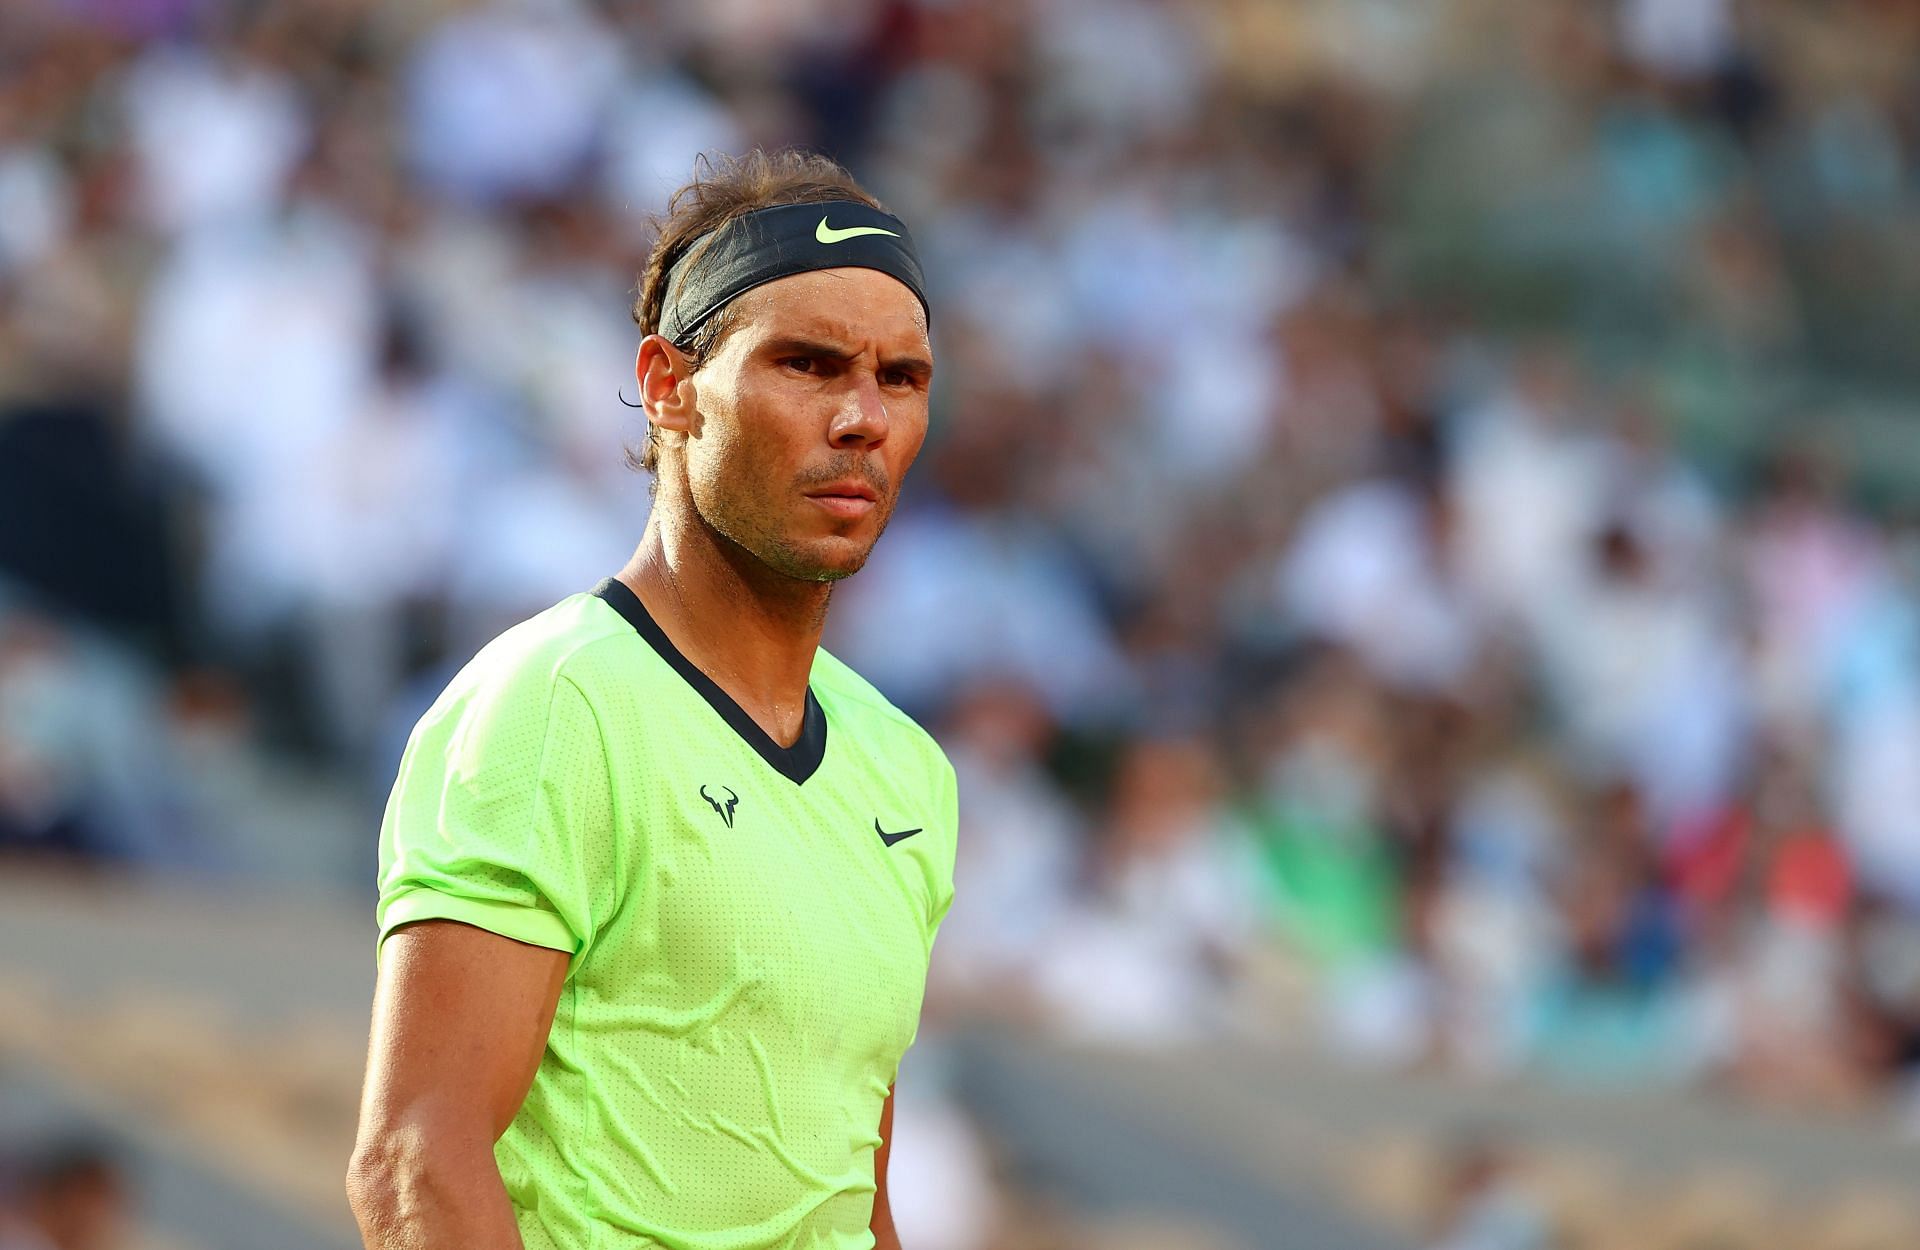 Rafael Nadal will not be playing at the 2023 French Open